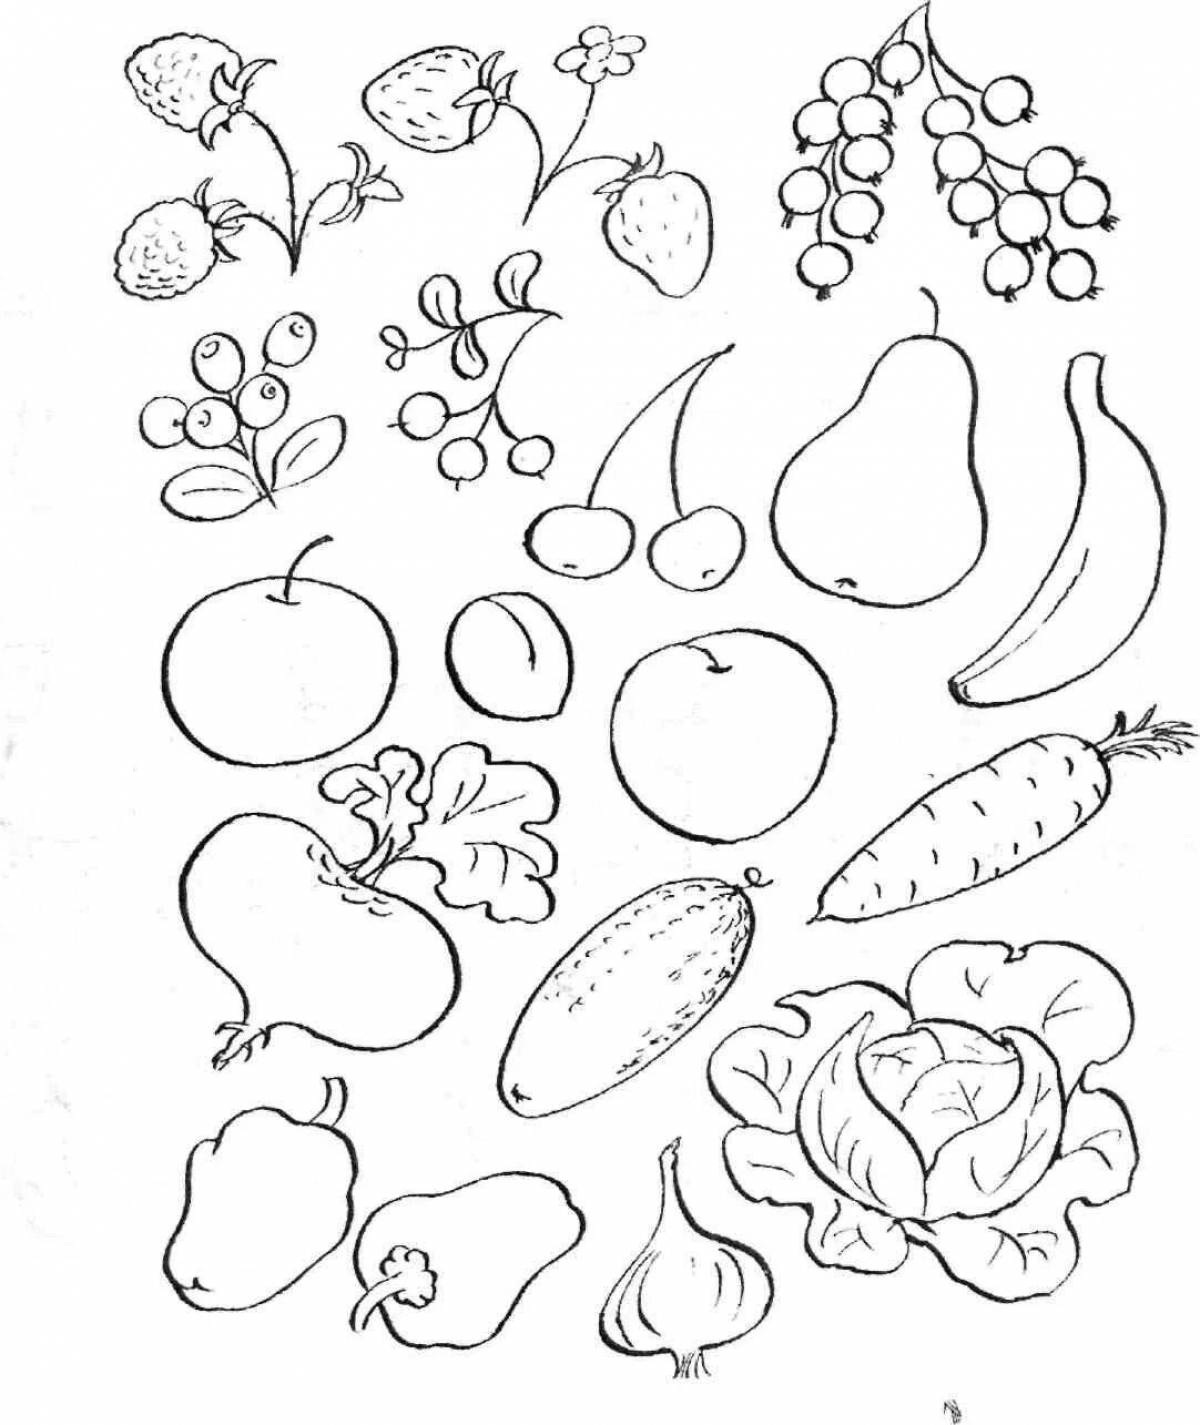 Coloring page nice fruits and vegetables